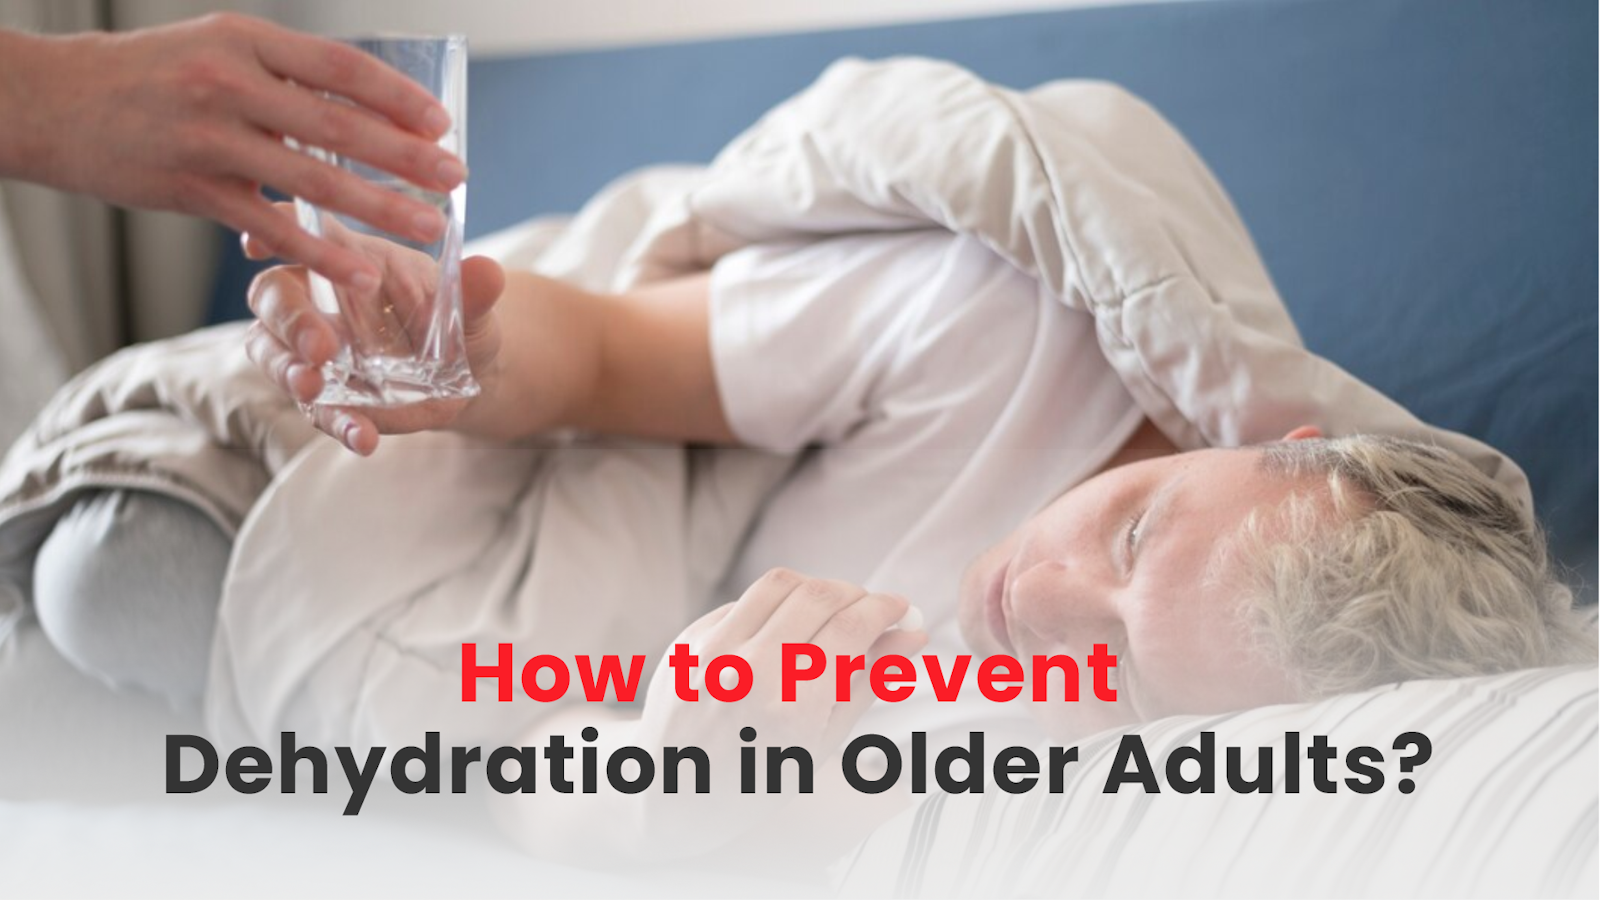 How to Prevent Dehydration in Older Adults?